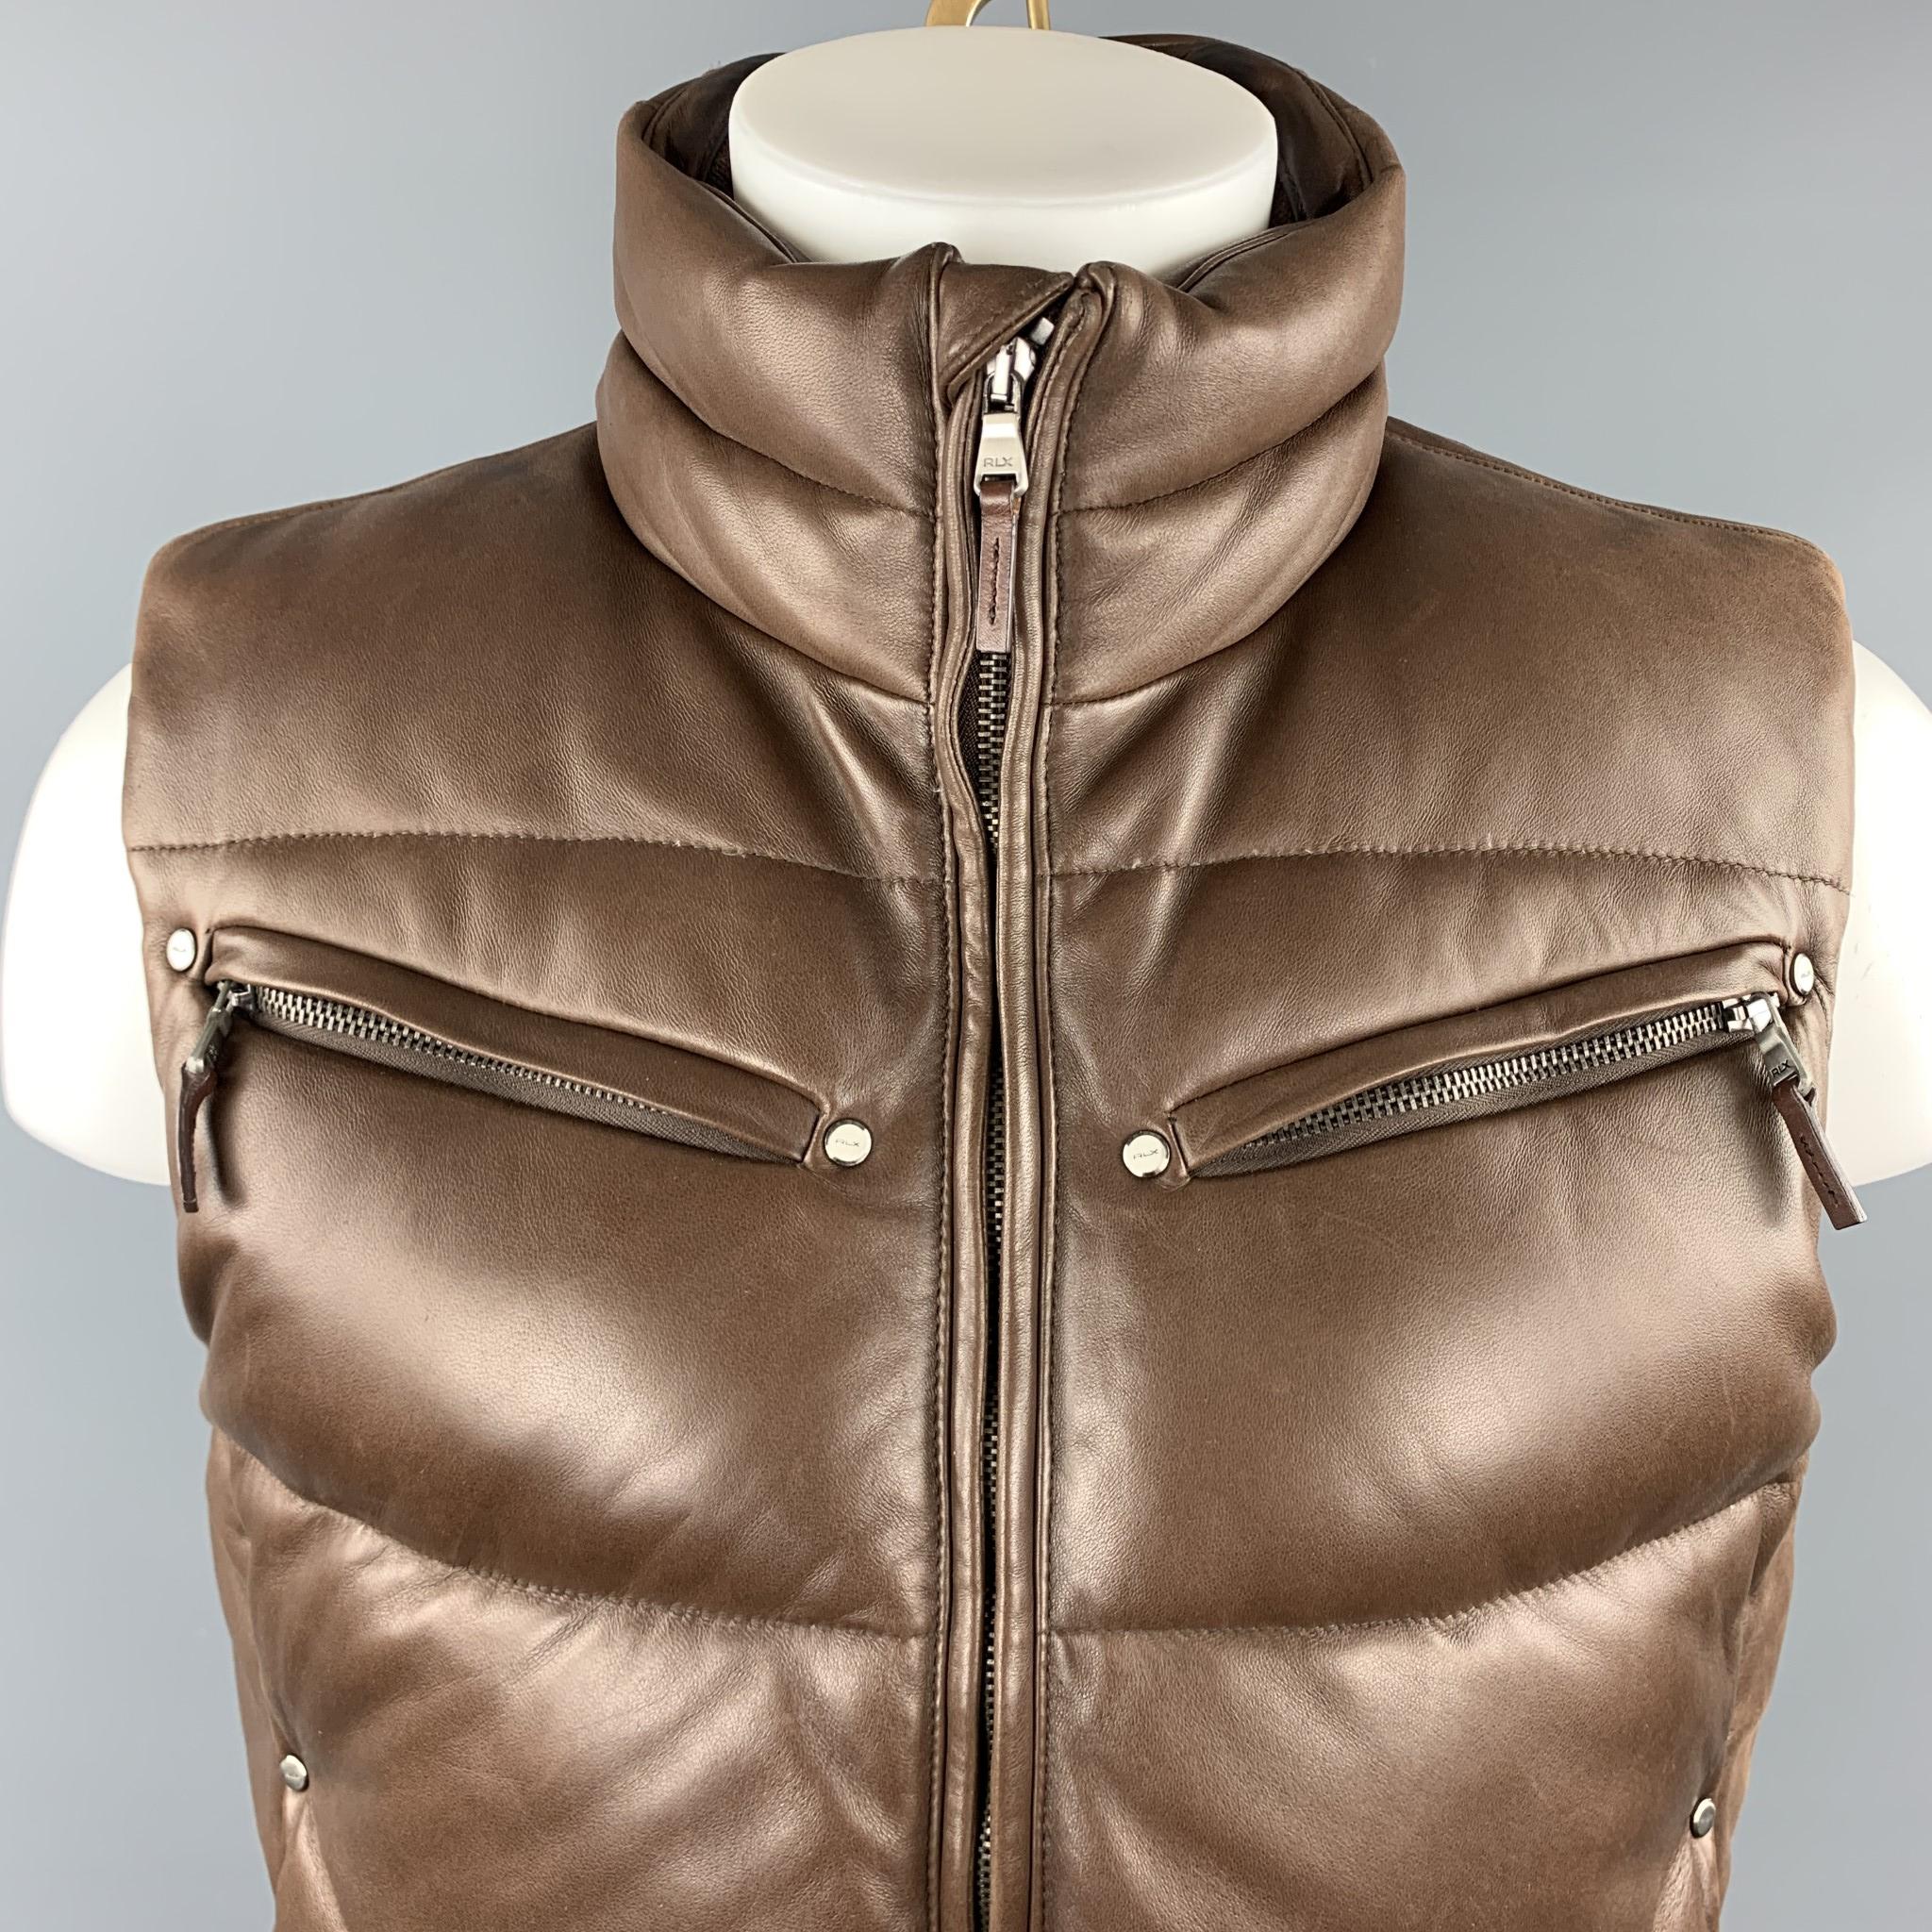 RLX by RALPH LAUREN puff vest comes in brown quilted leather with down filling, high neck, zip front, and zip pockets. Wear throughout leather and around collar. 

Very Good Pre-Owned Condition.
Marked: M
Original Retail Price: